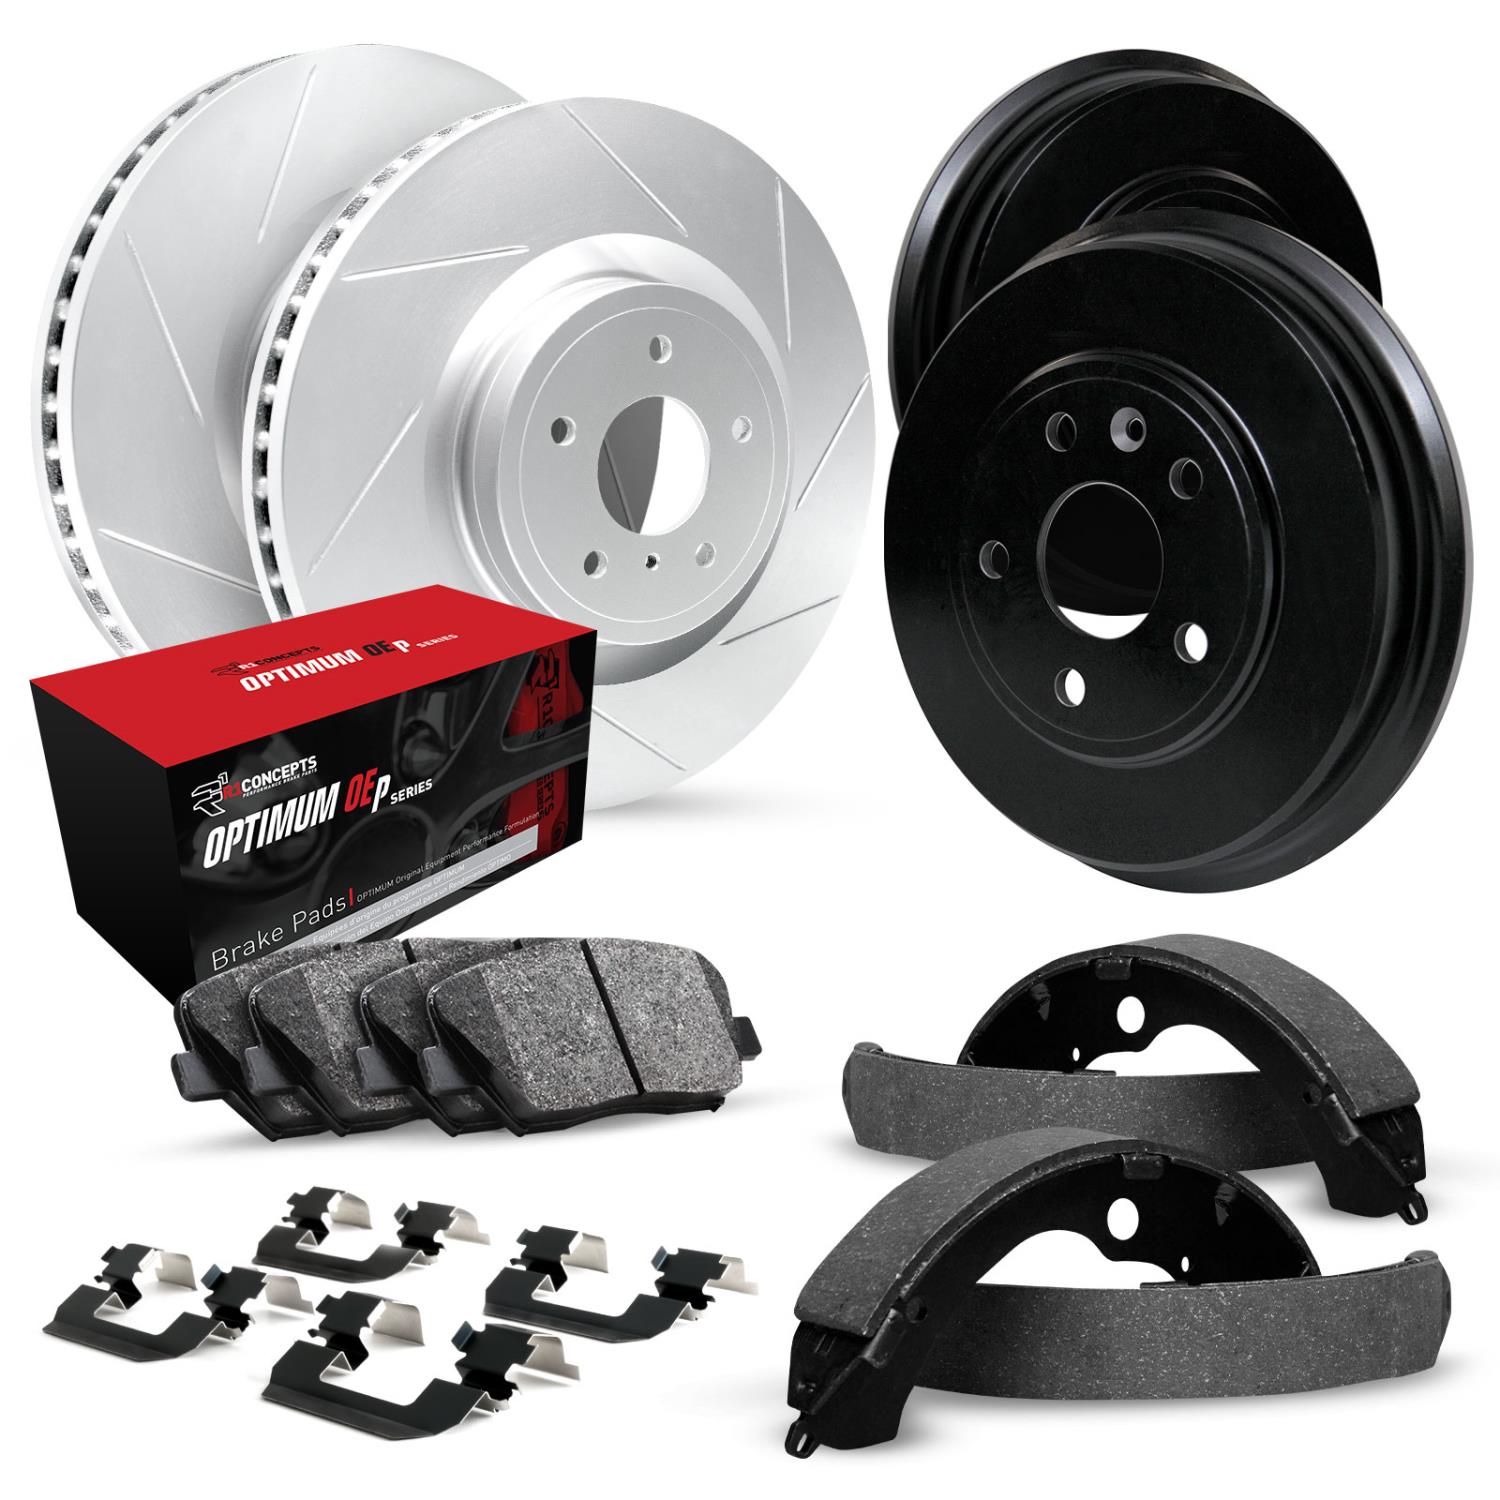 GEO-Carbon Slotted Brake Rotor & Drum Set w/Optimum OE Pads, Shoes, & Hardware, 1994-1996 Ford/Lincoln/Mercury/Mazda